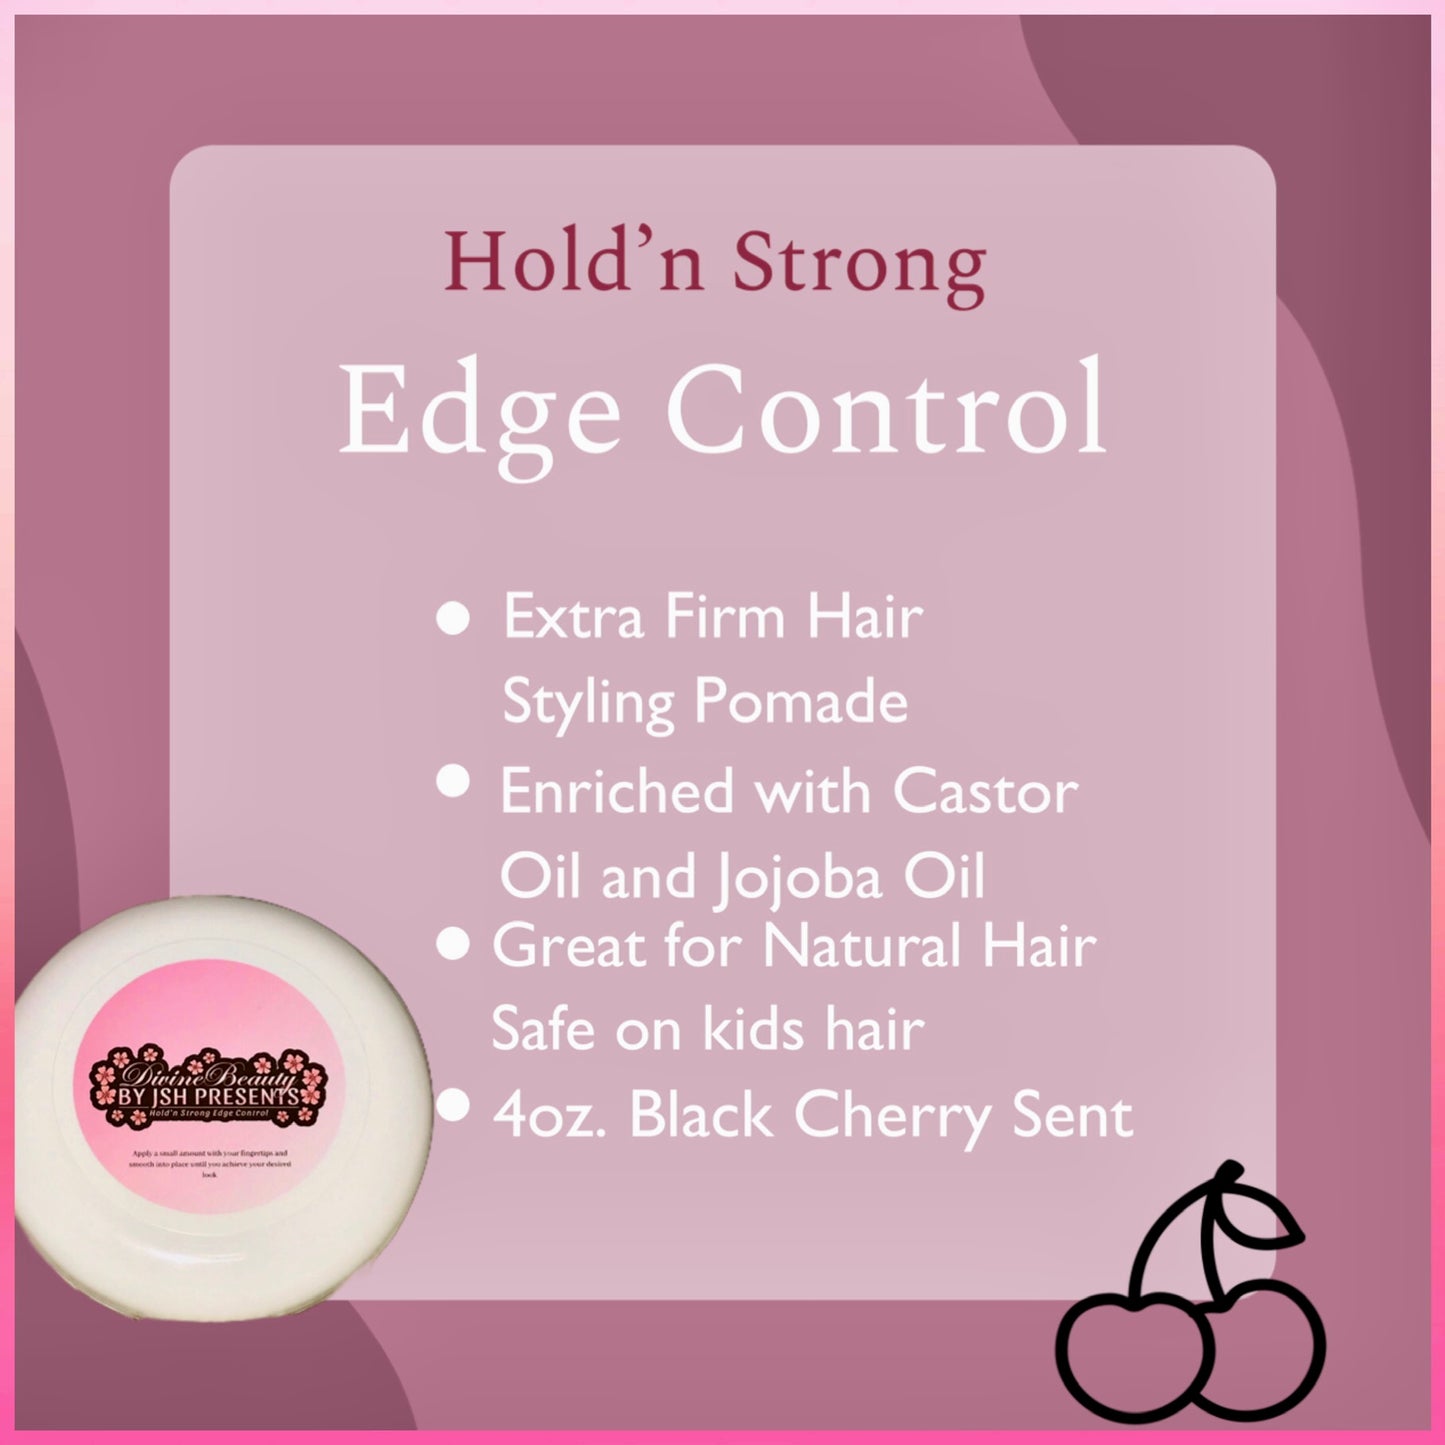 Hold'n Strong Edge Control